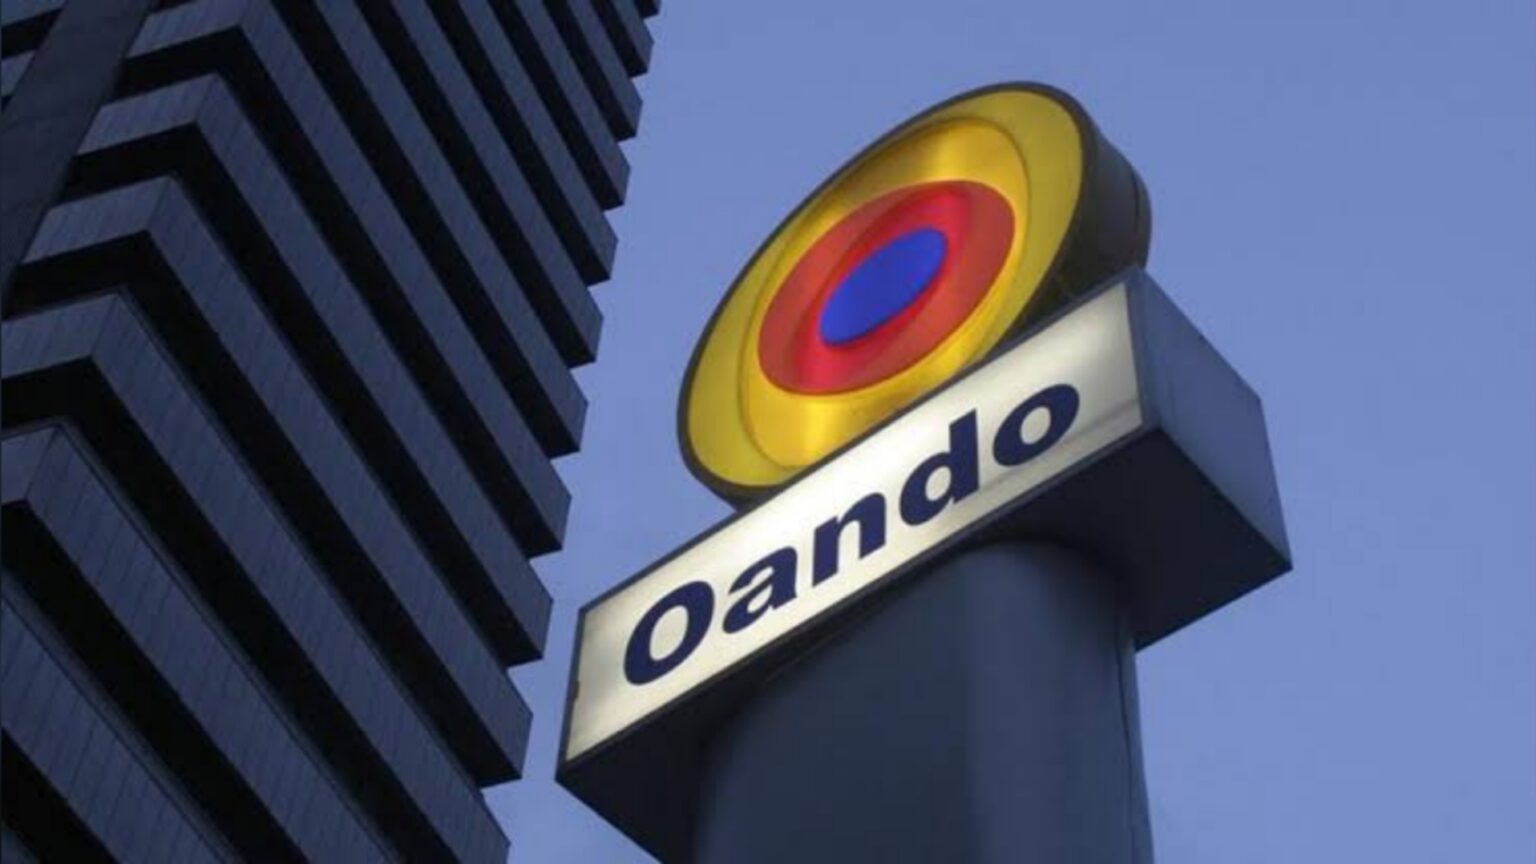 Oando takes delivery of Nigeria’s first mass